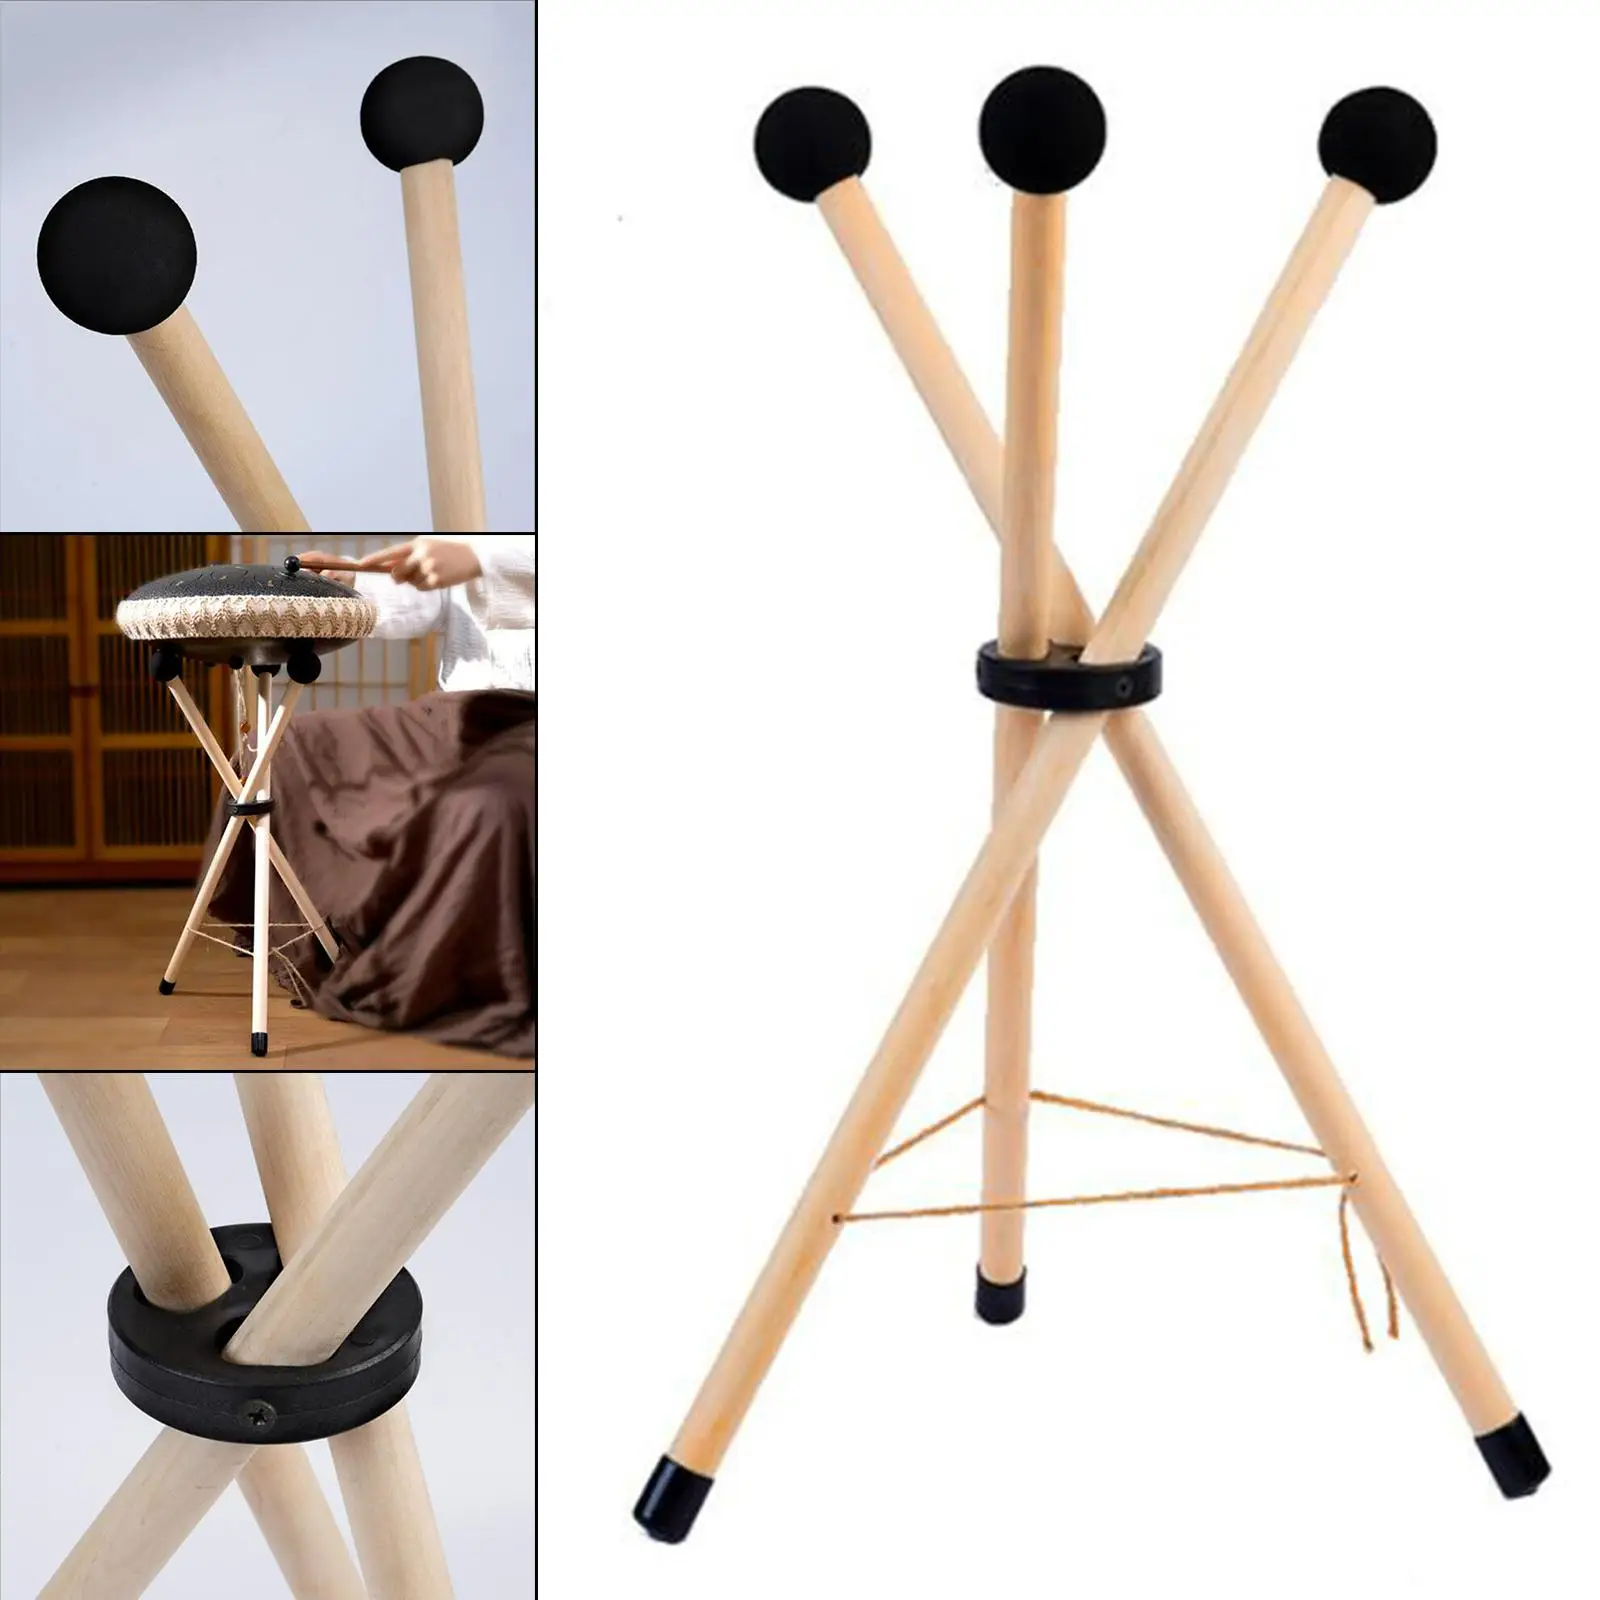 Drum Holder, Solid Wood Tripod Foldable Stable Stand, Tongue Drum Tripod Stand Holder Percussion Drum Accessory